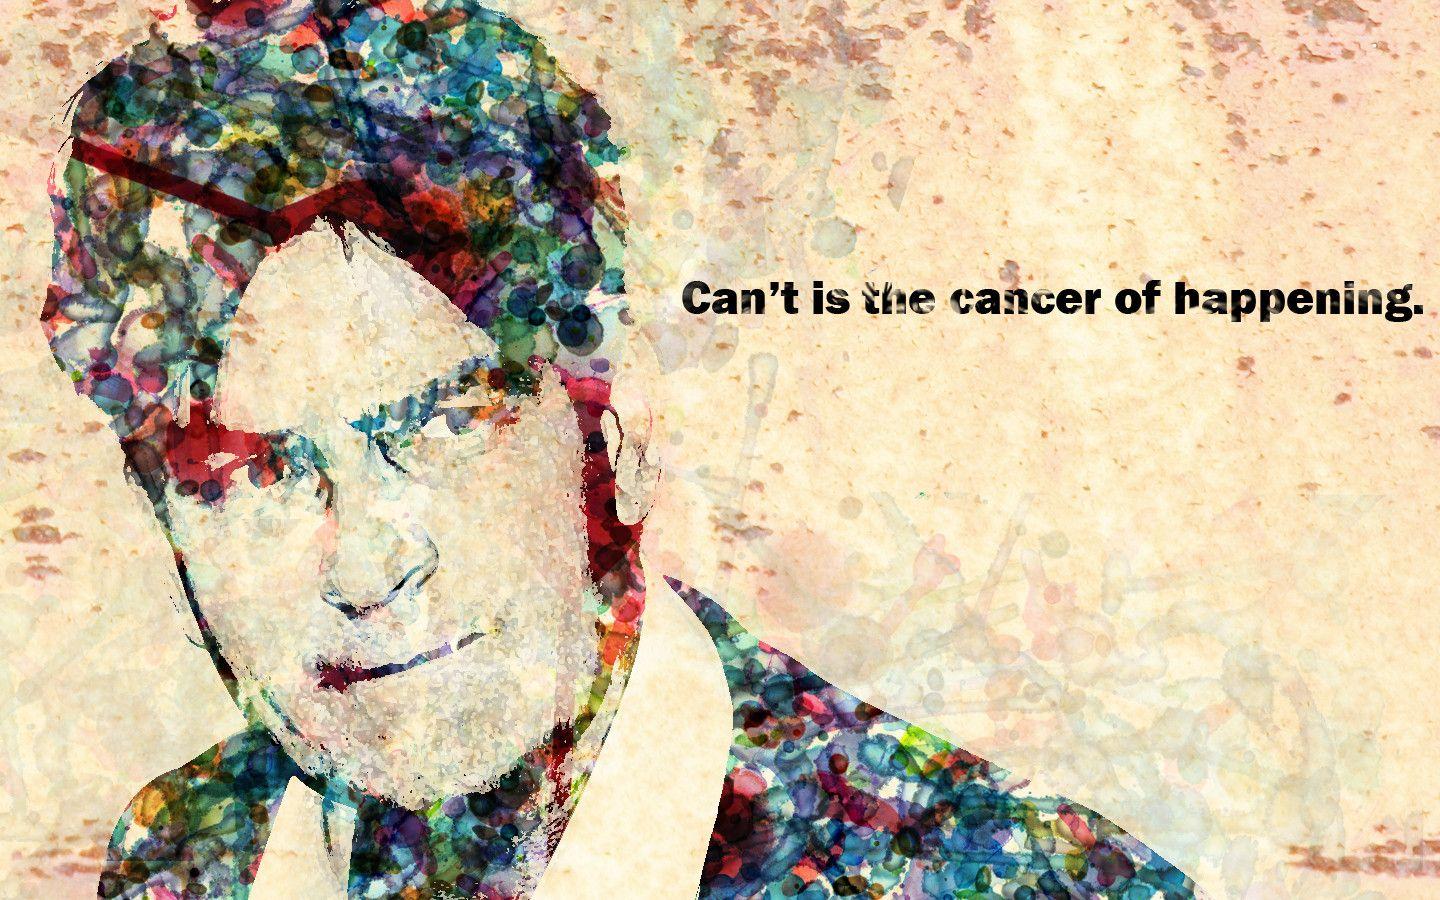 Charlie Sheen wallpaper I made about a year ago